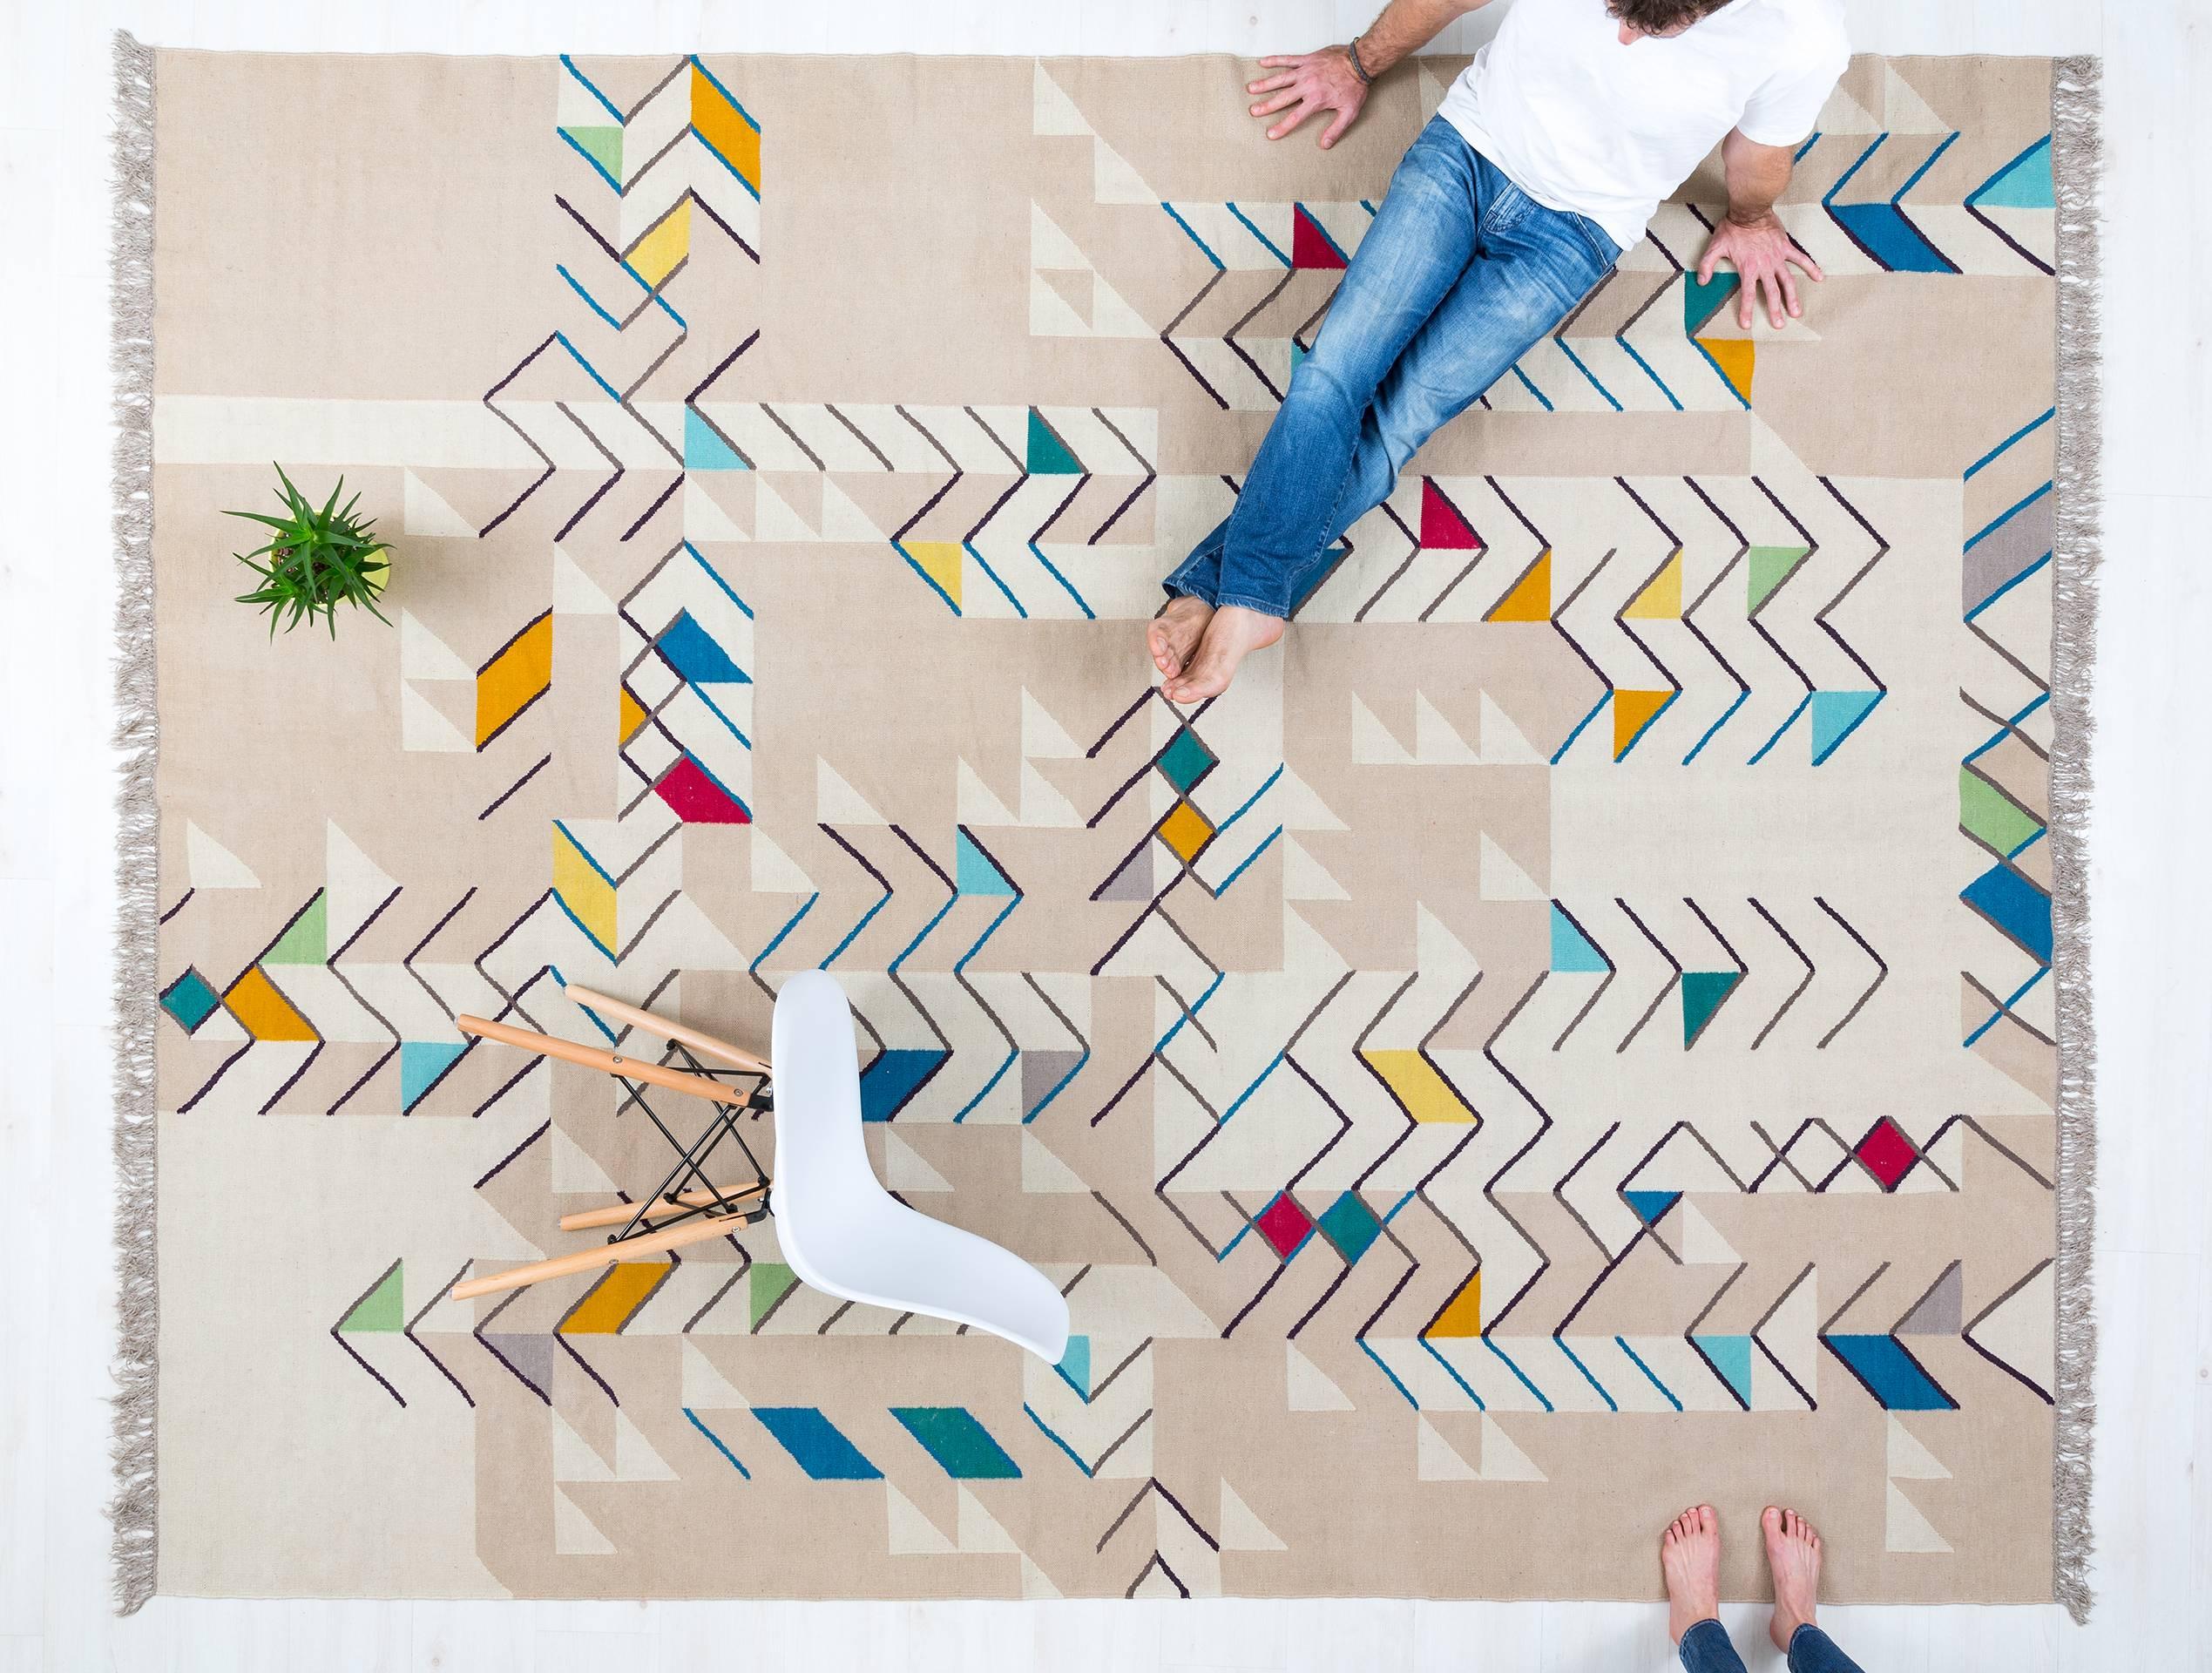 This is an open edition Kilim rug, woven by Odabashian's network of family-owned weavers near Mirzapur, India with the finest New Zealand wool. The design was created by Miami based artist, Johanna Boccardo for Zona Maco Contemporary Art Fair 2016.